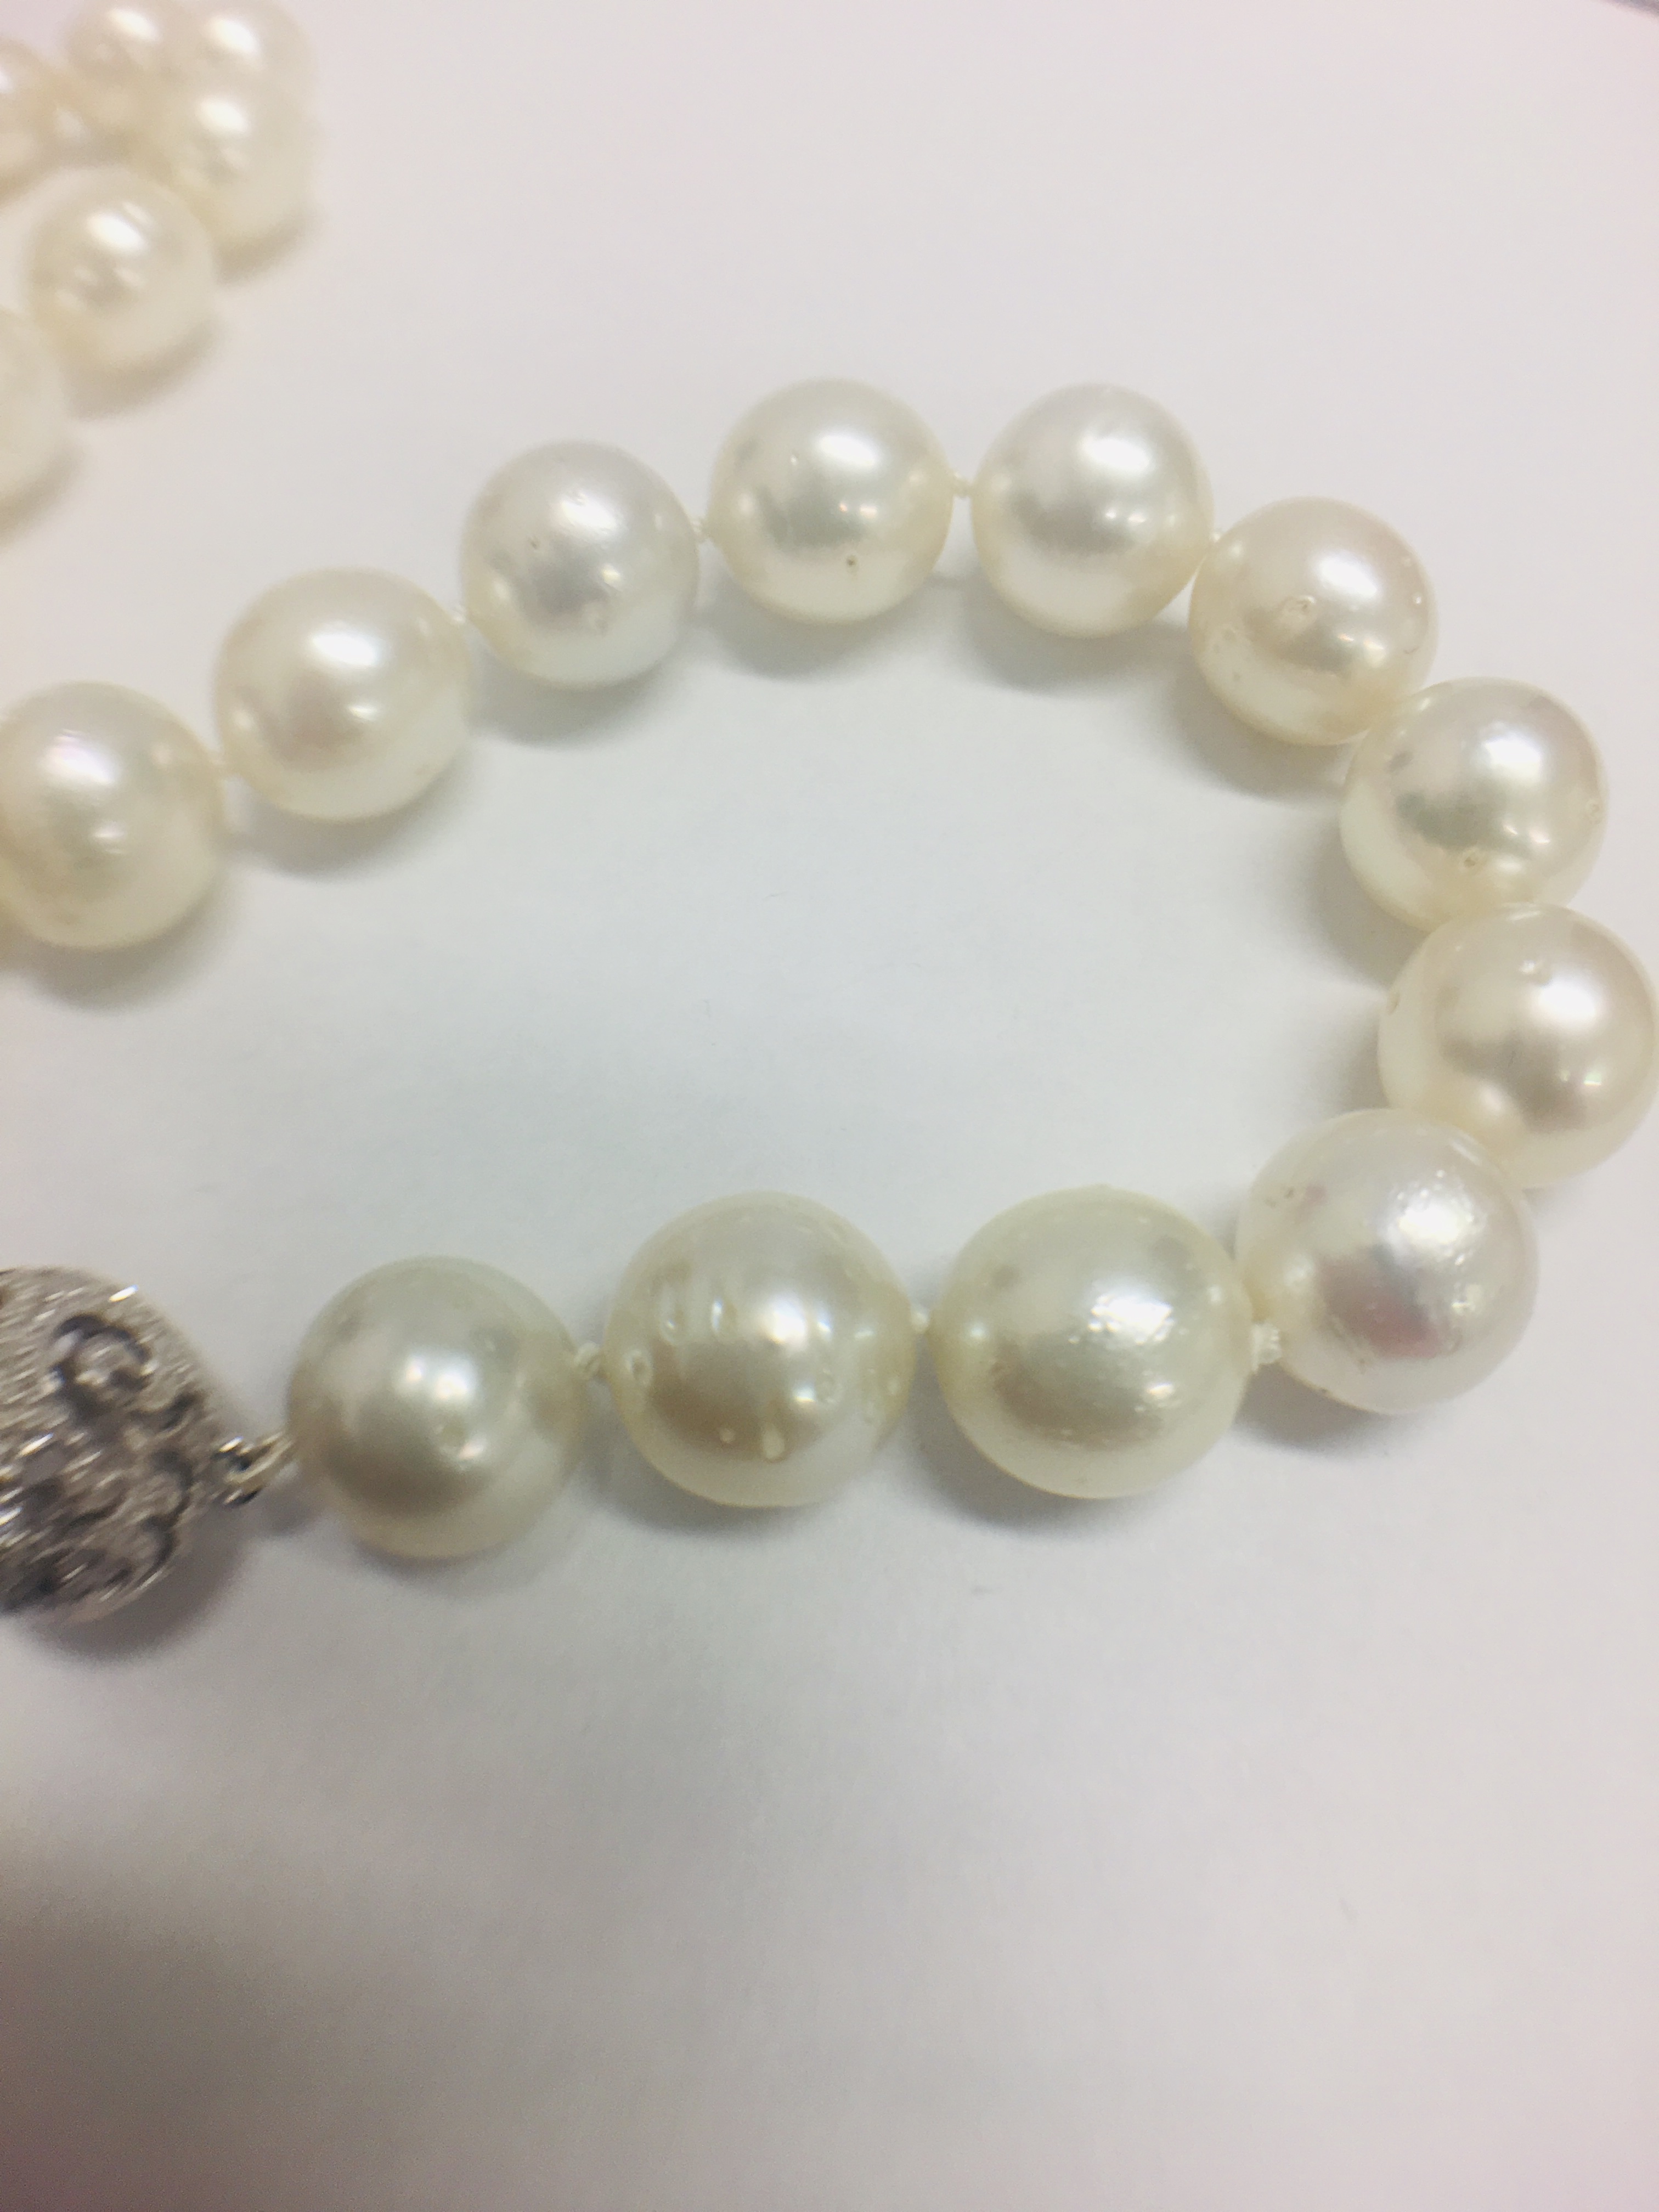 Strand 35 South Sea Pearls With 14Ct White Gold Filagree Style Ball Clasp. - Image 8 of 10